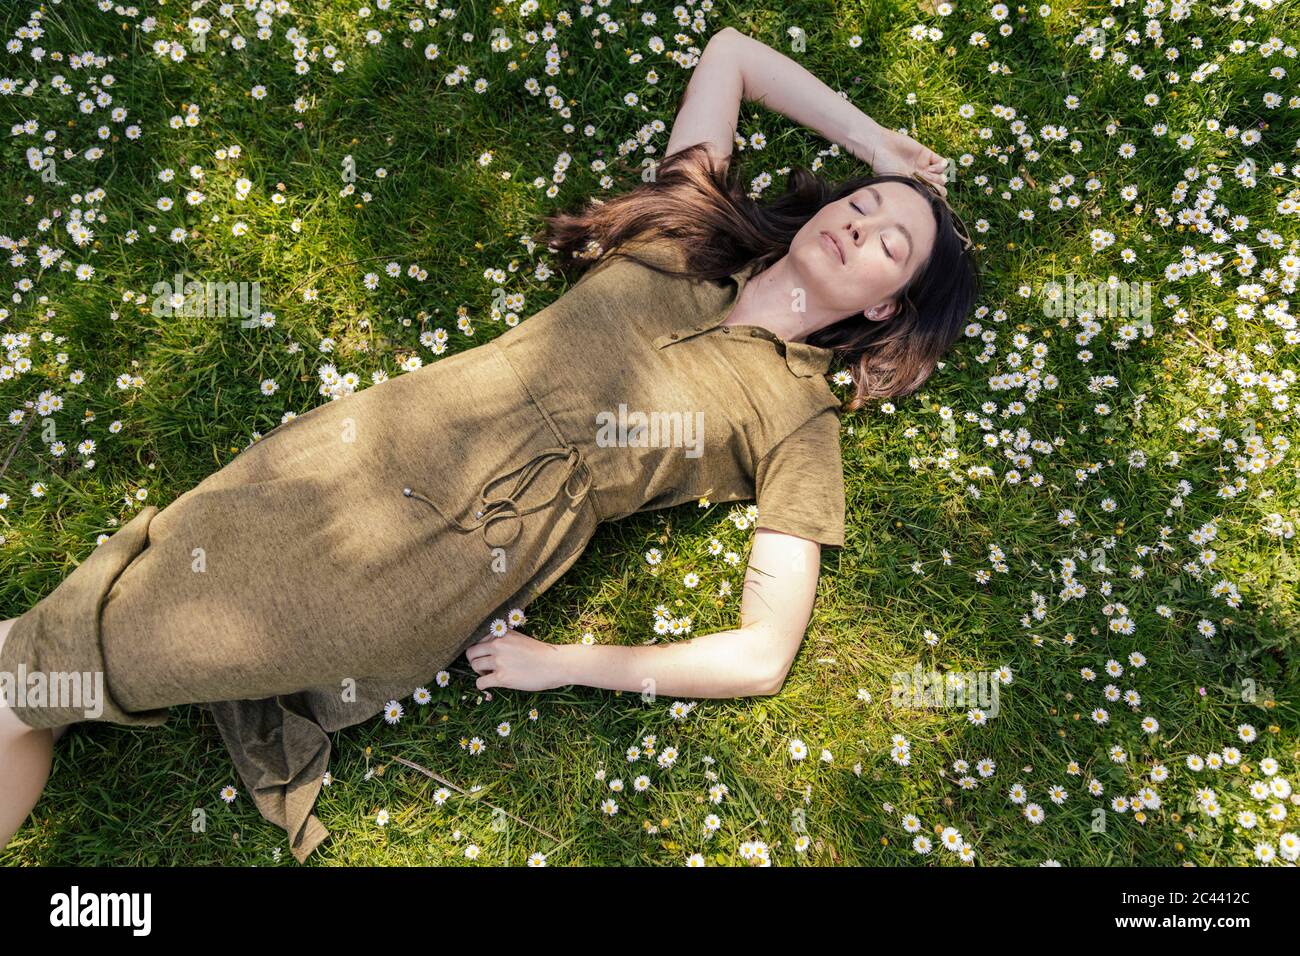 Woman enjoying her free time while lying on grass with daisies Stock Photo